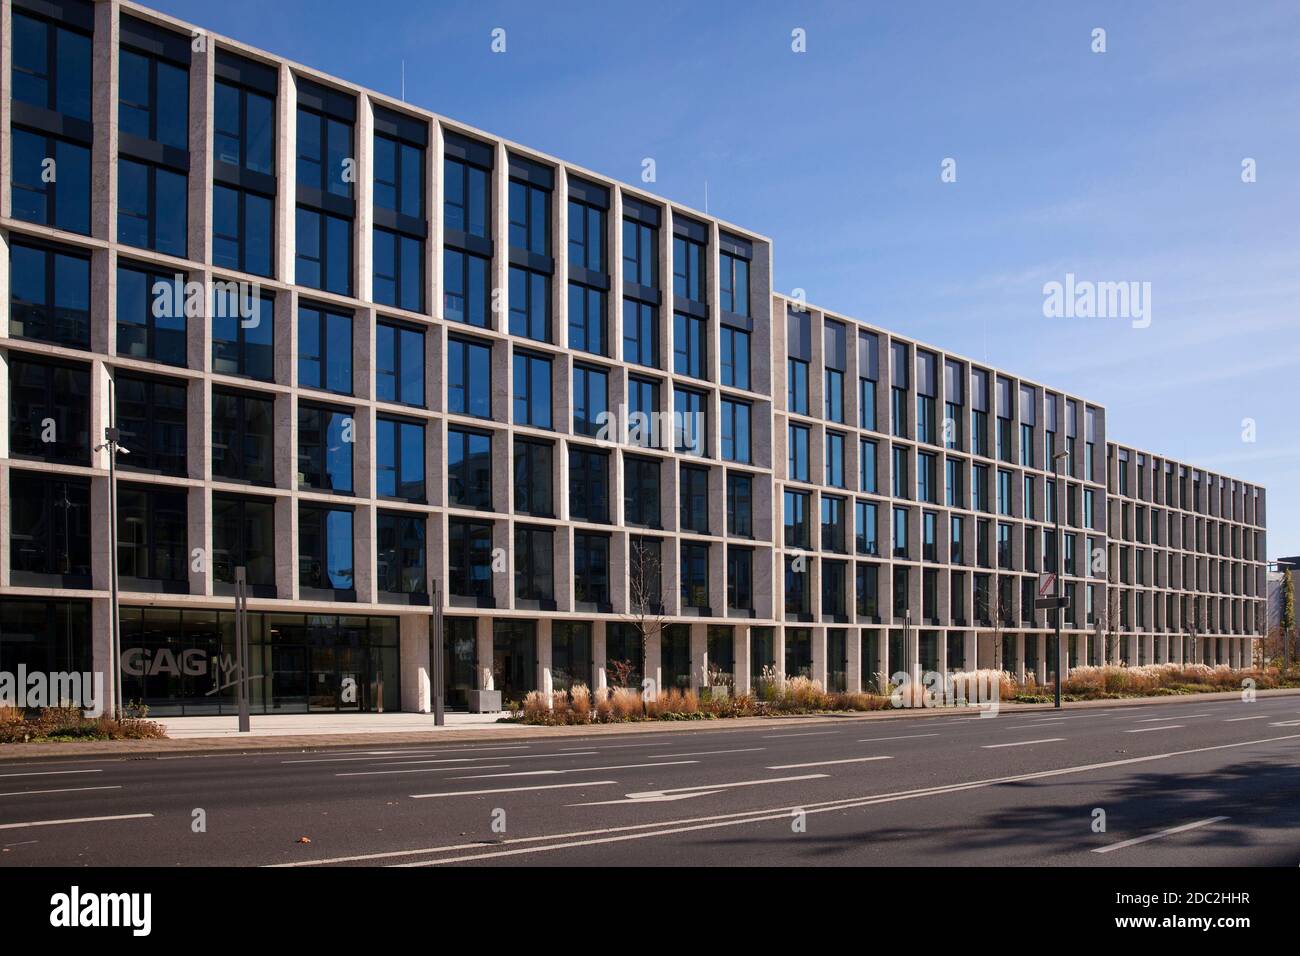 the head office of the GAG Immobilien AG in the Kalk district of Cologne, Germany.  die Hauptverwaltung der GAG Immobilien AG im Stadtteil Kalk, Koeln Stock Photo